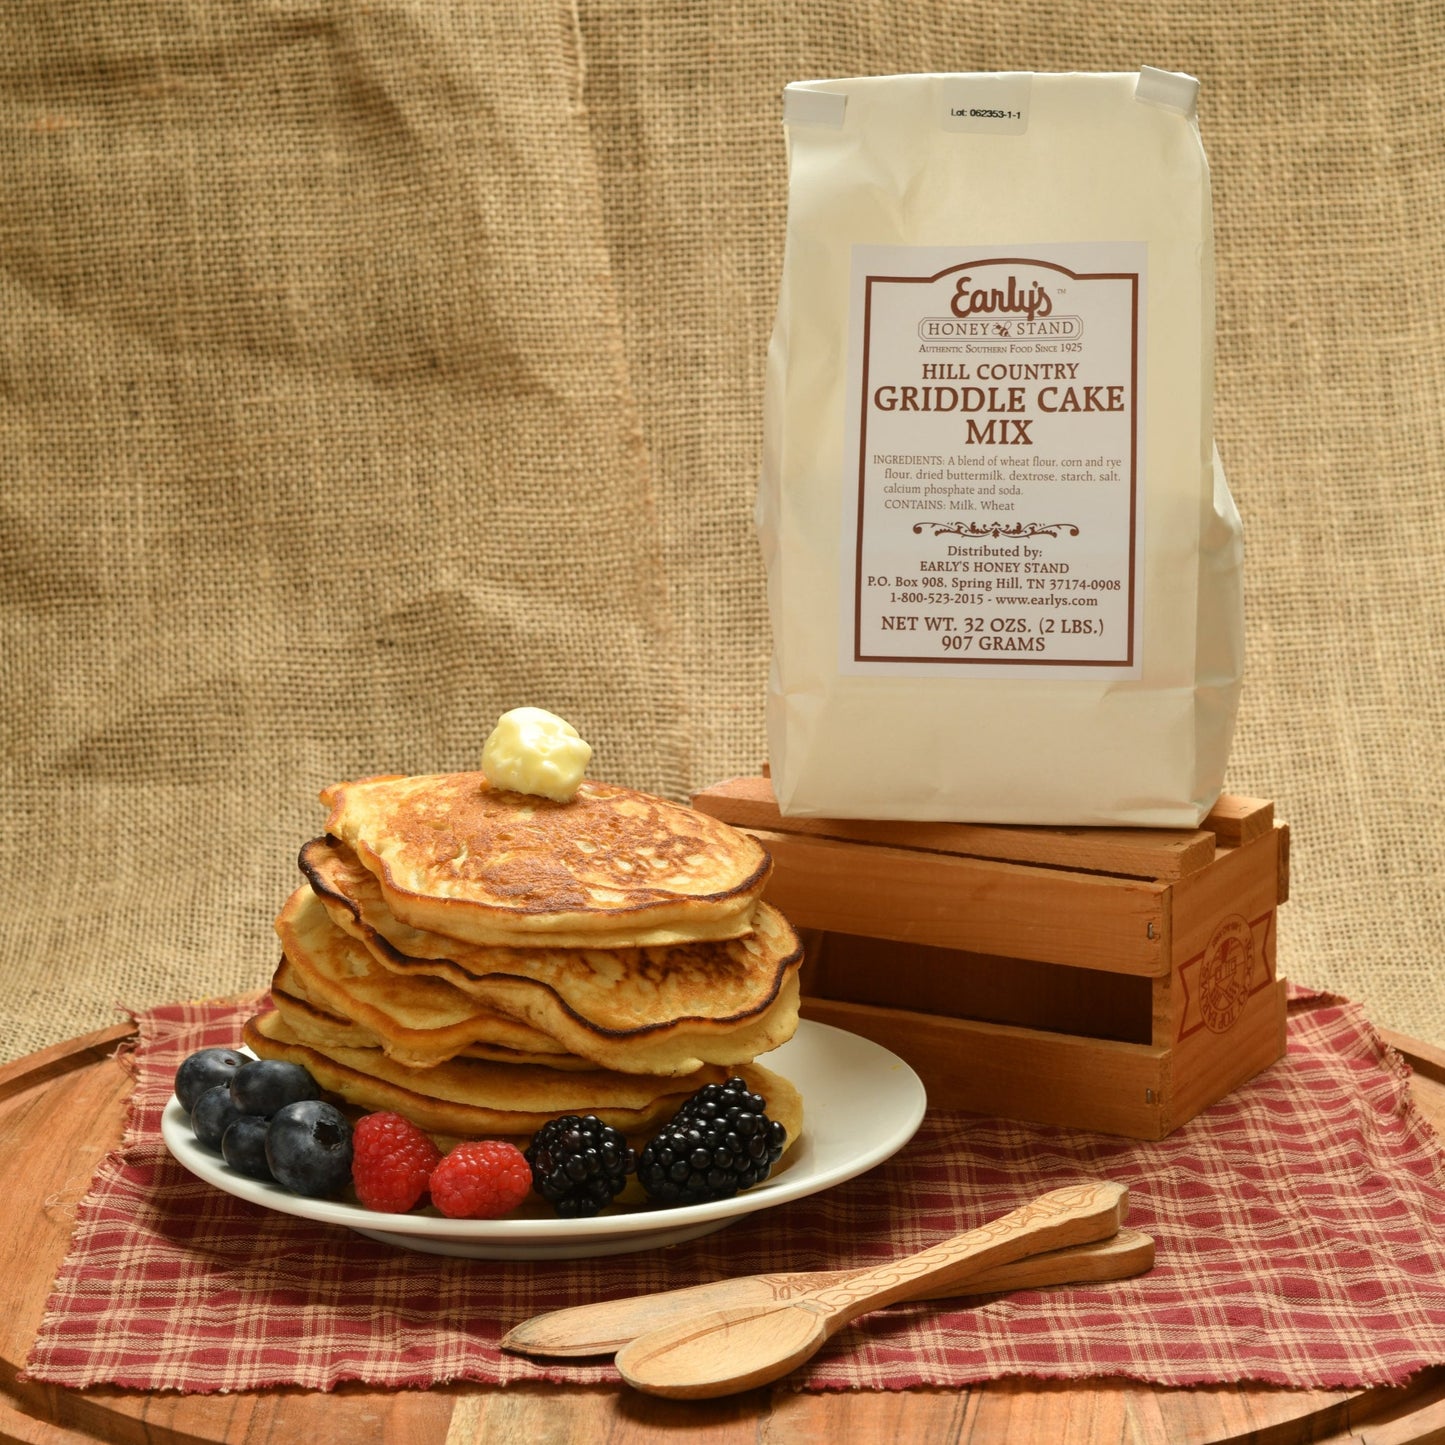 Early's Honey Stand all natural griddle cake mix pictured with a stack of griddle cakes and fruit. 